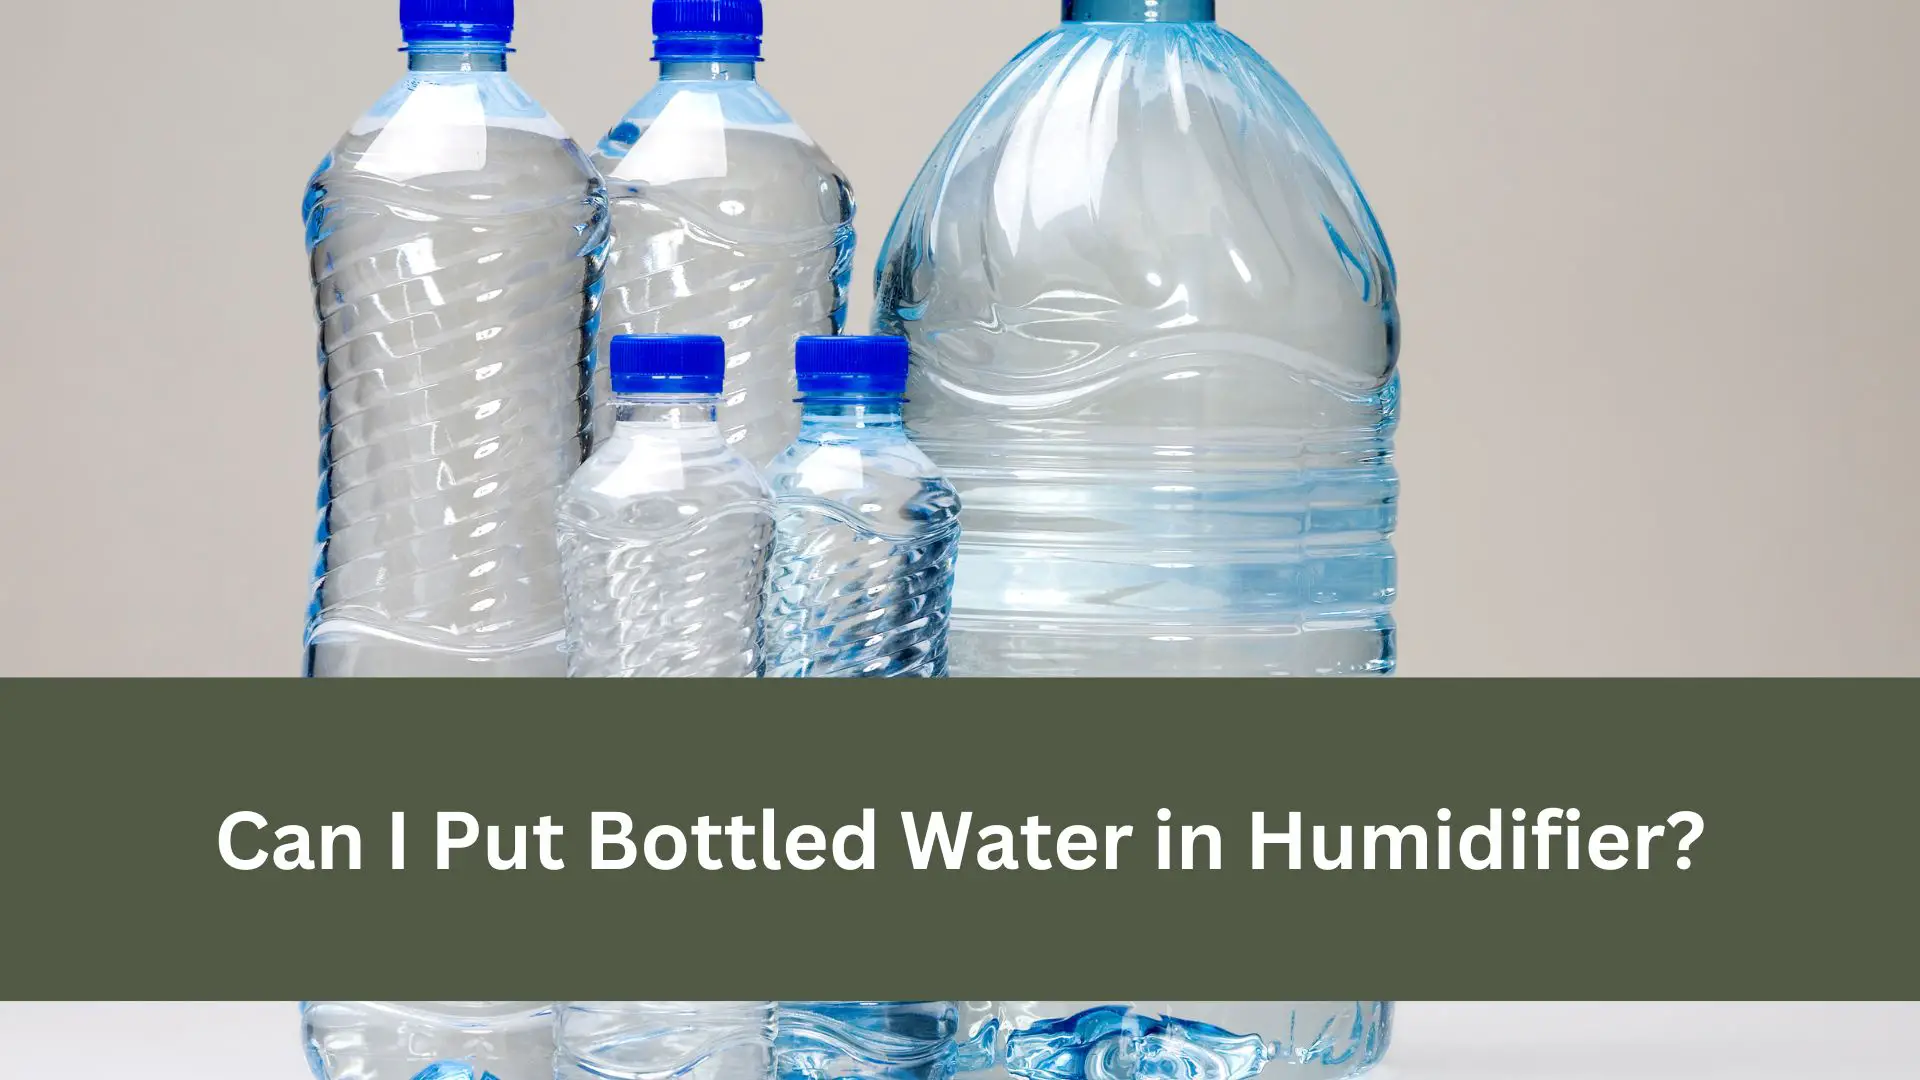 Can I Put Bottled Water in Humidifier?